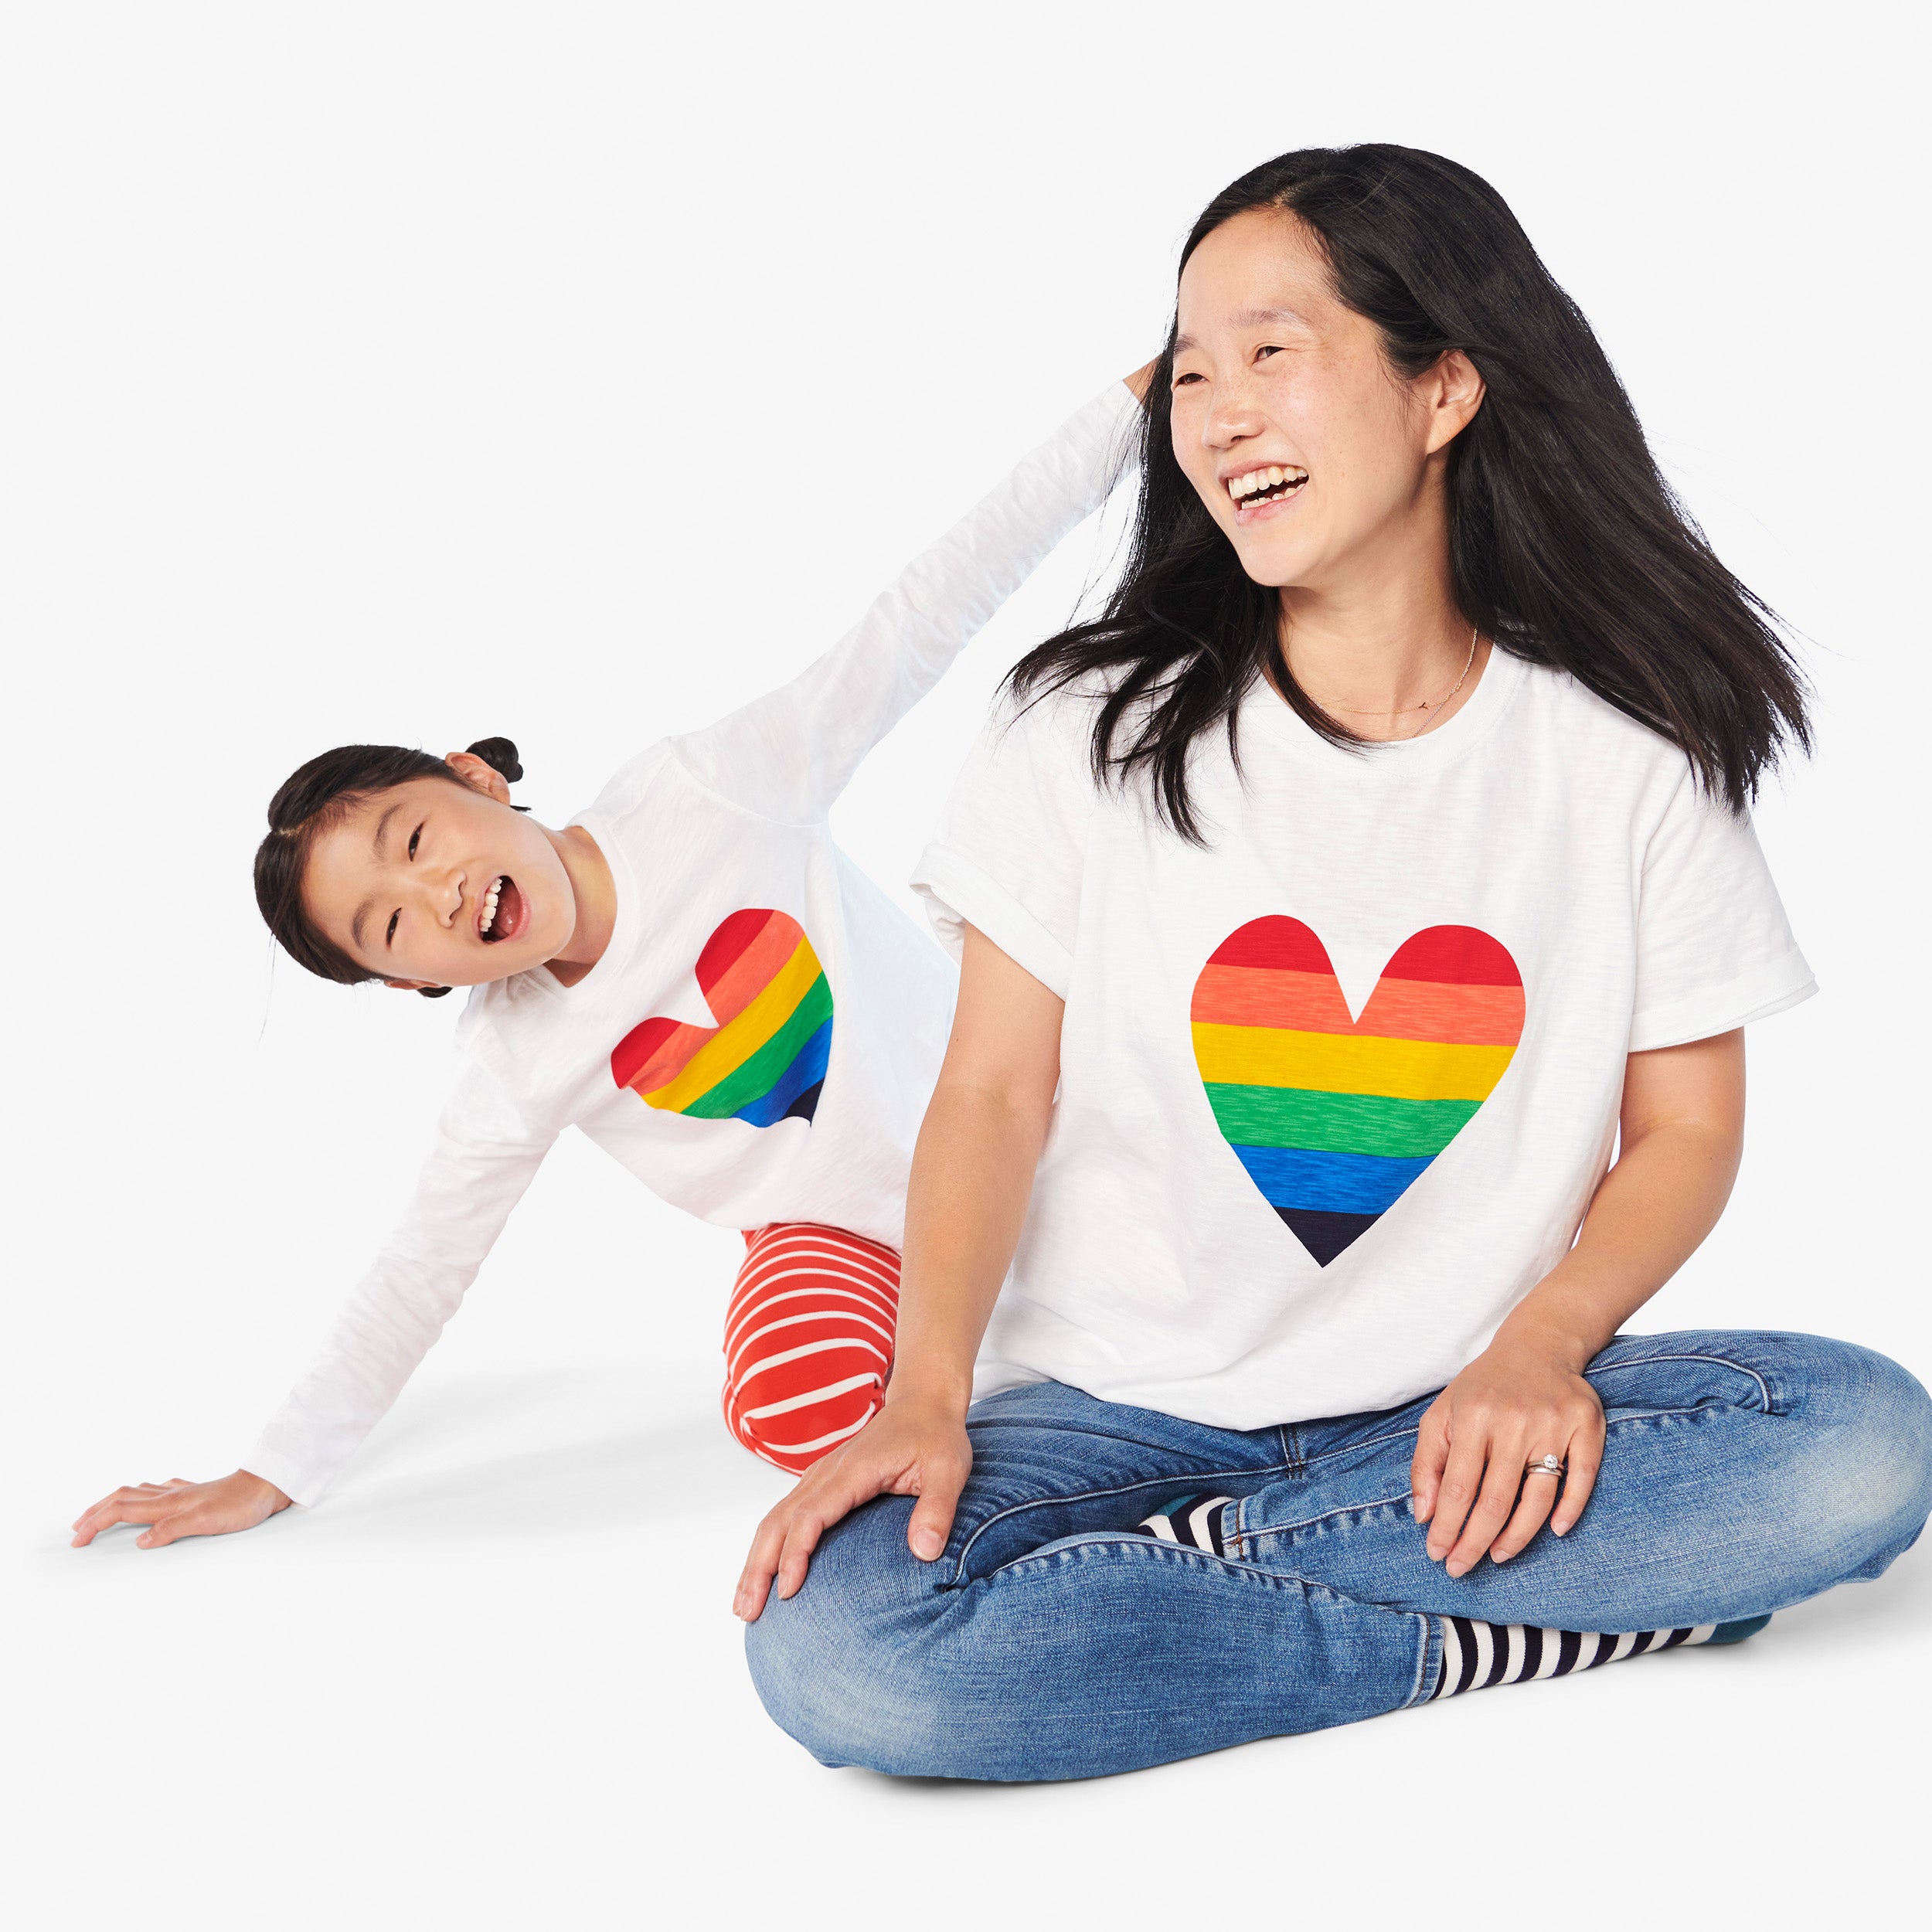 Design by Humans Rainbow Colored String Pride Heart by corndesign T-Shirt - White - Small